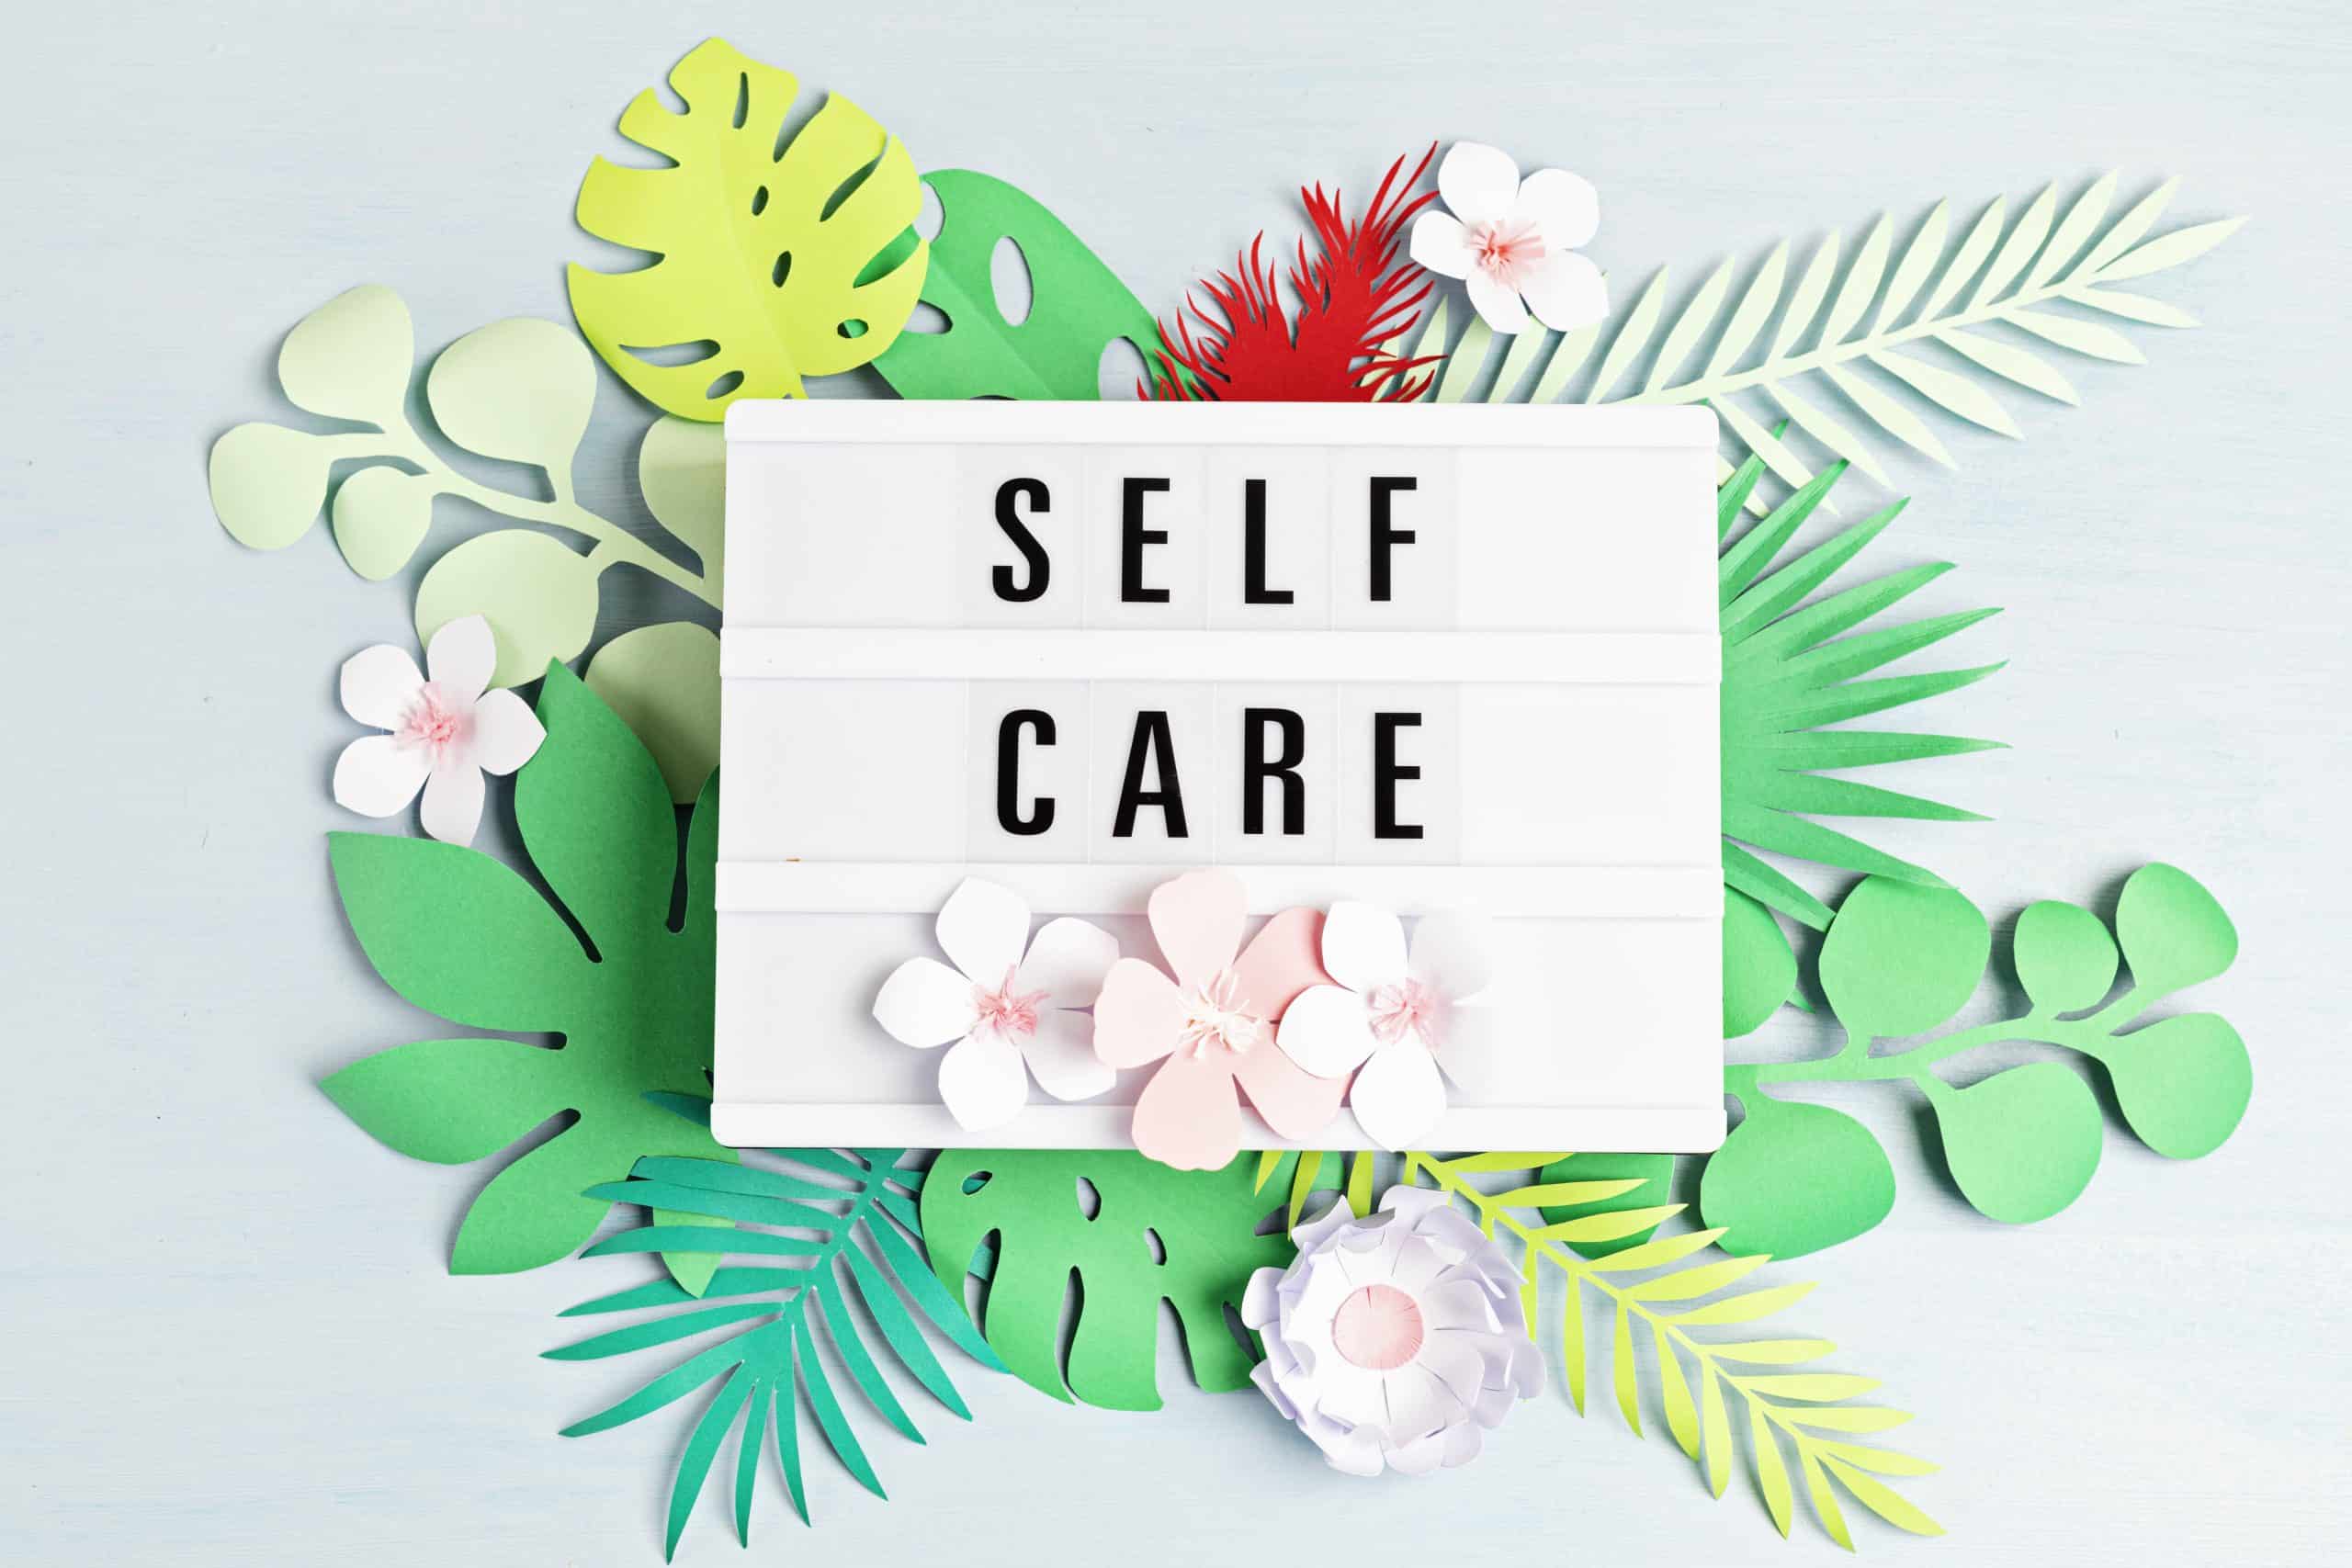 lightbox with the words "self care" surrounded by flowers for National Self Care Day